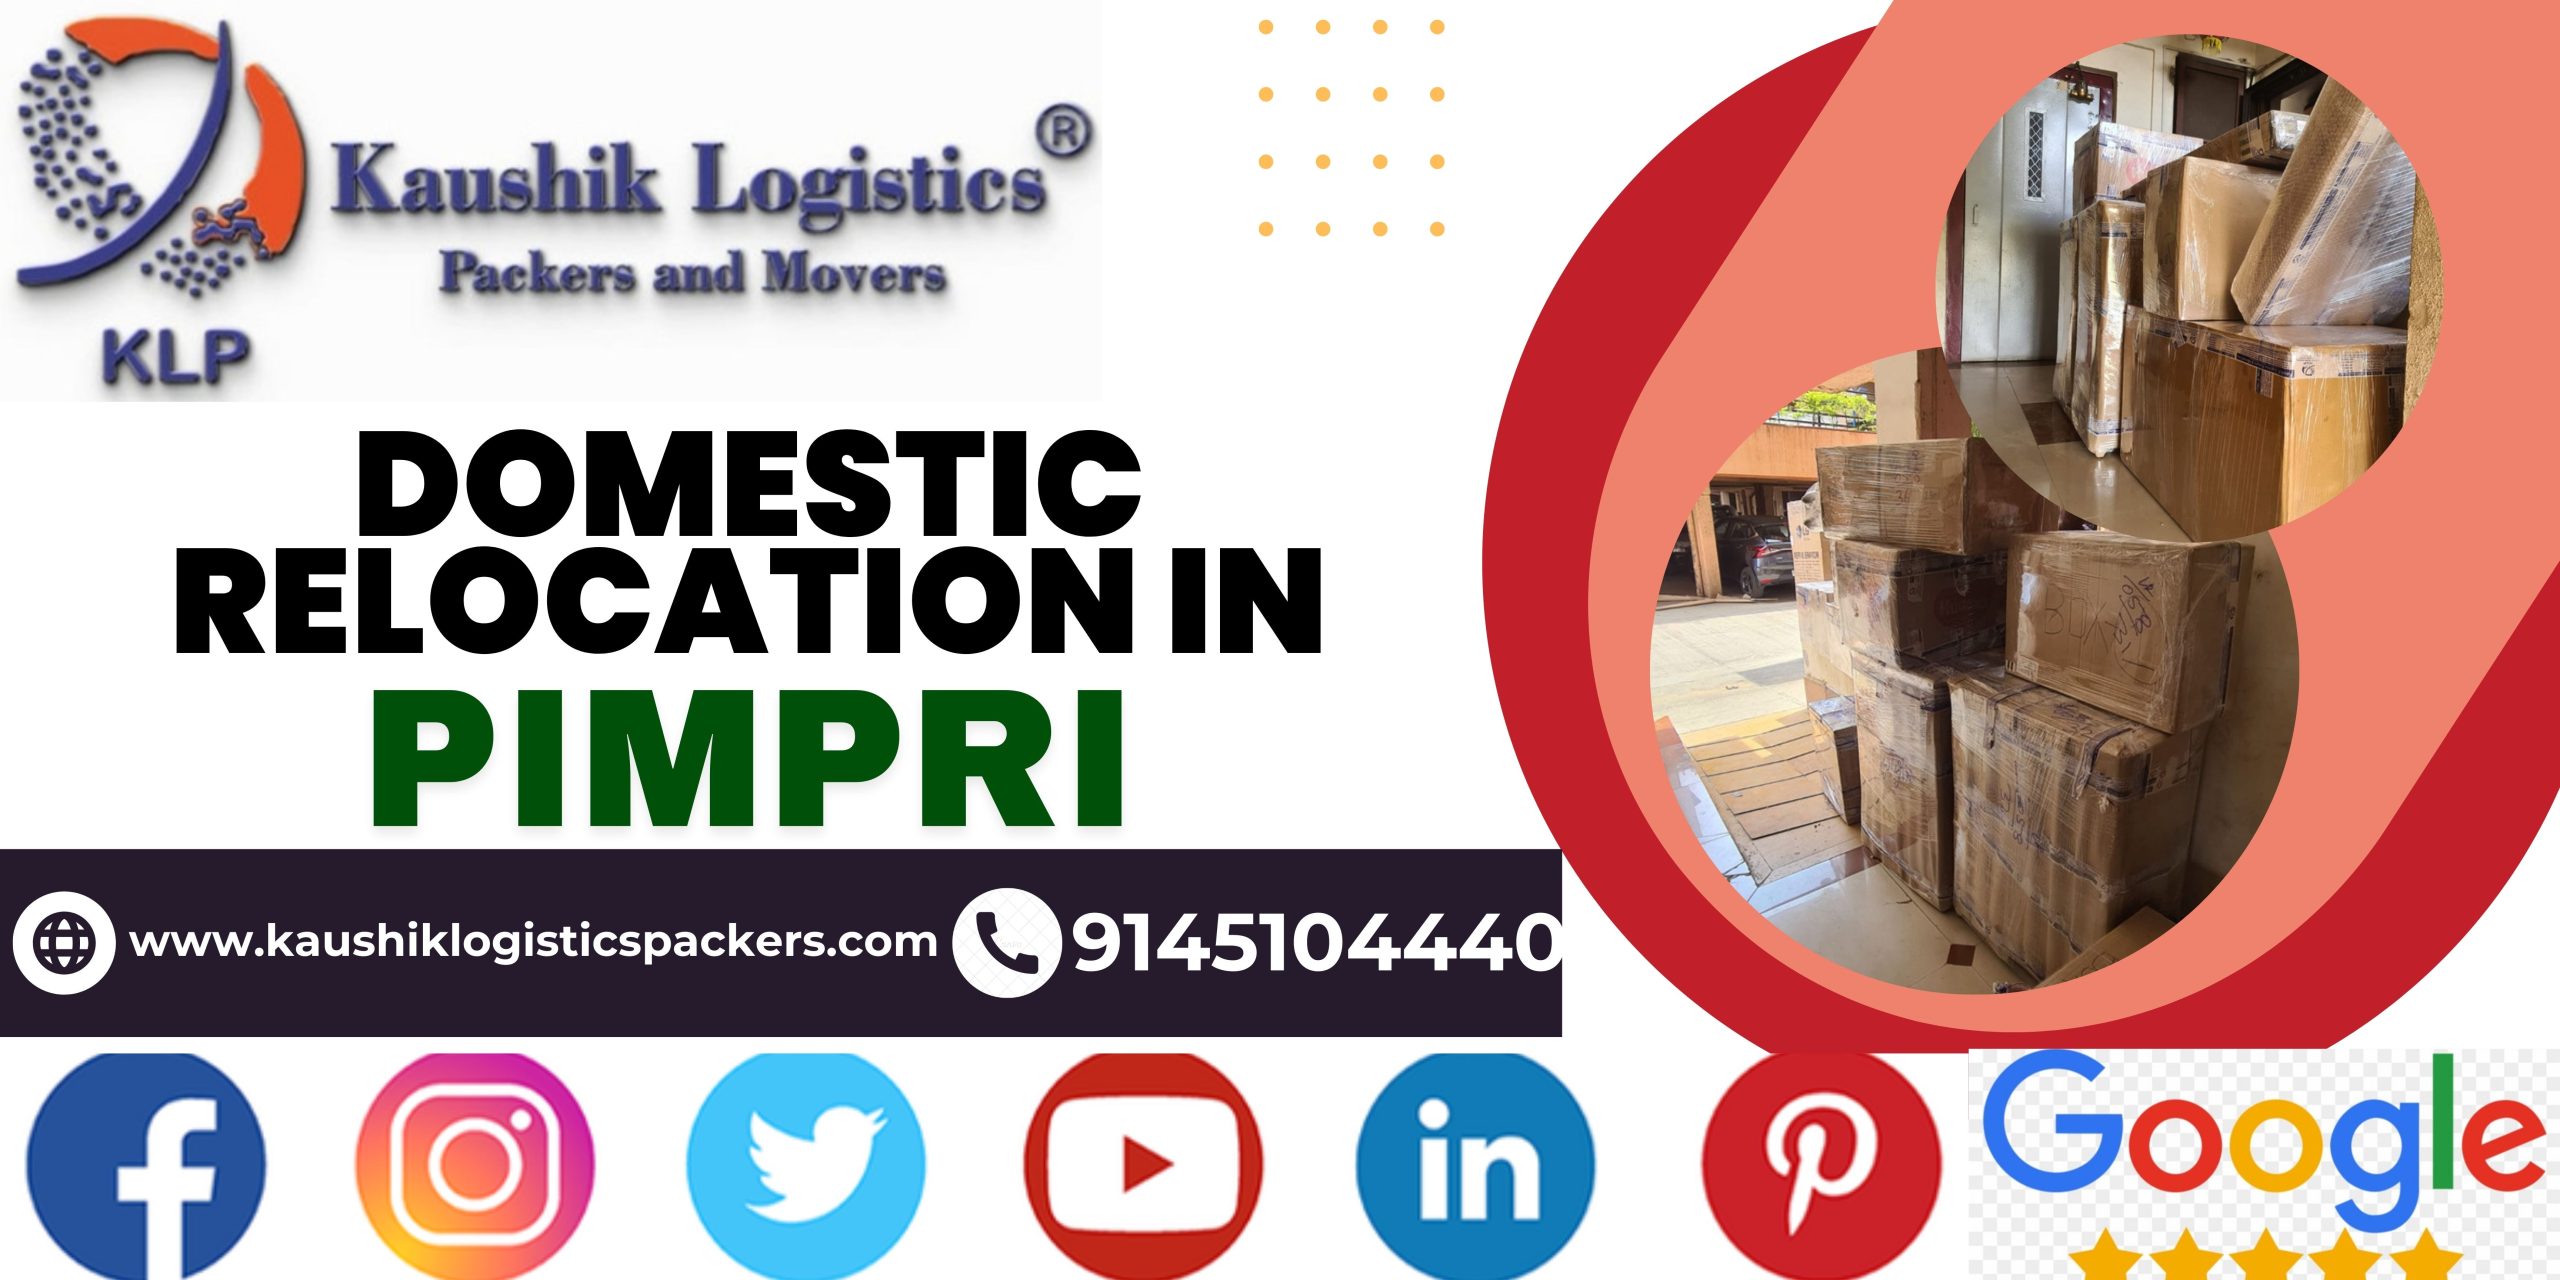 Packers and Movers In Pimpri